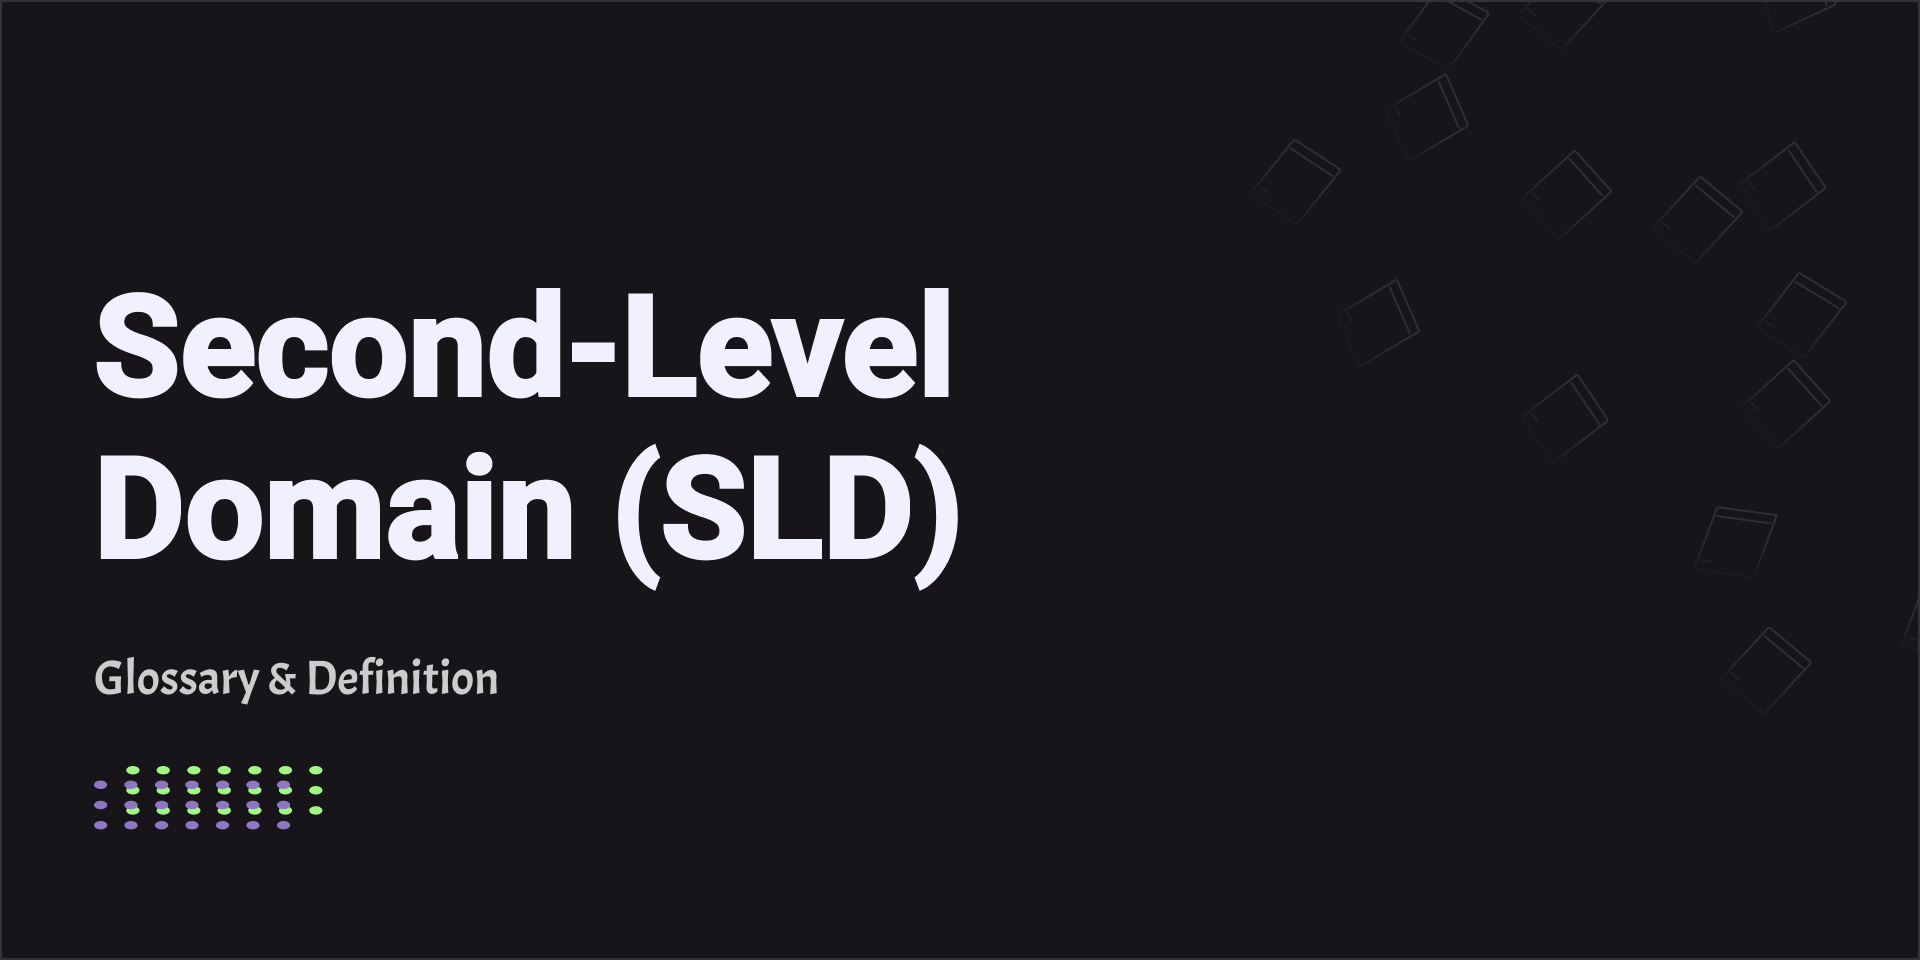 Second-Level Domain (SLD)